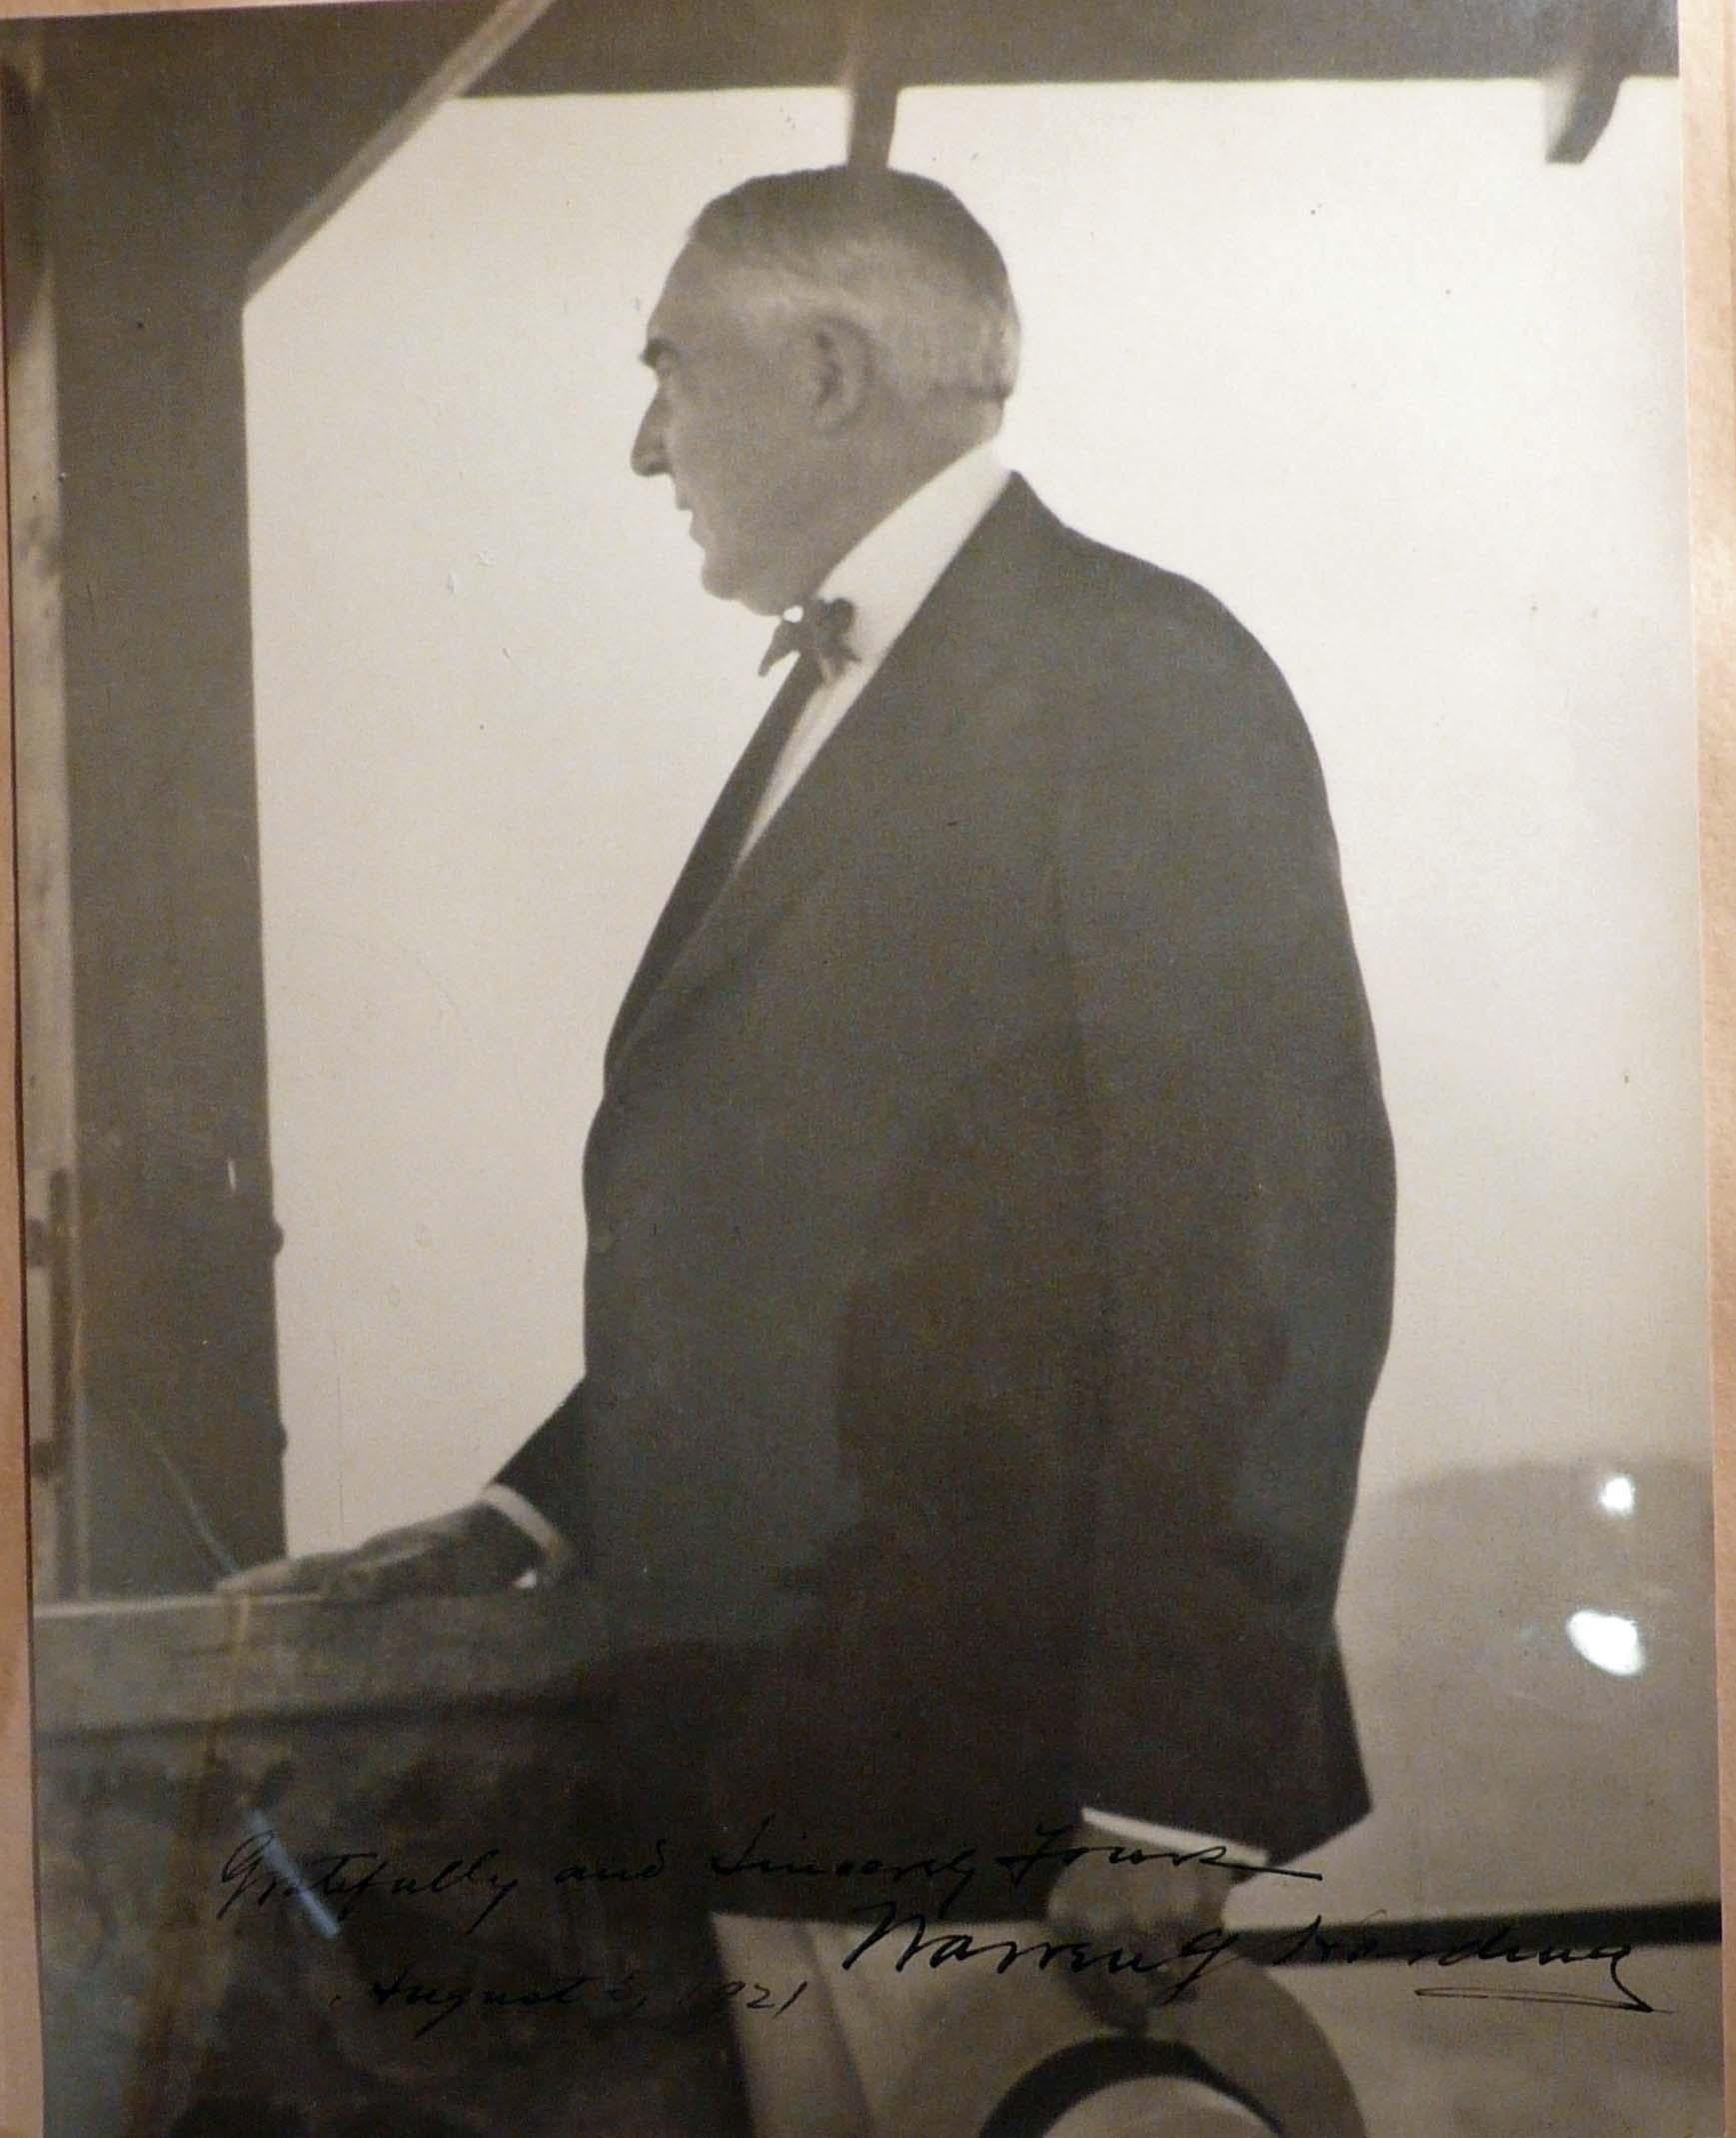 WARREN G. HARDING SIGNED, INSCRIBED AND DATED PHOTOGRAPH - Photograph by Charles Urban Shorey